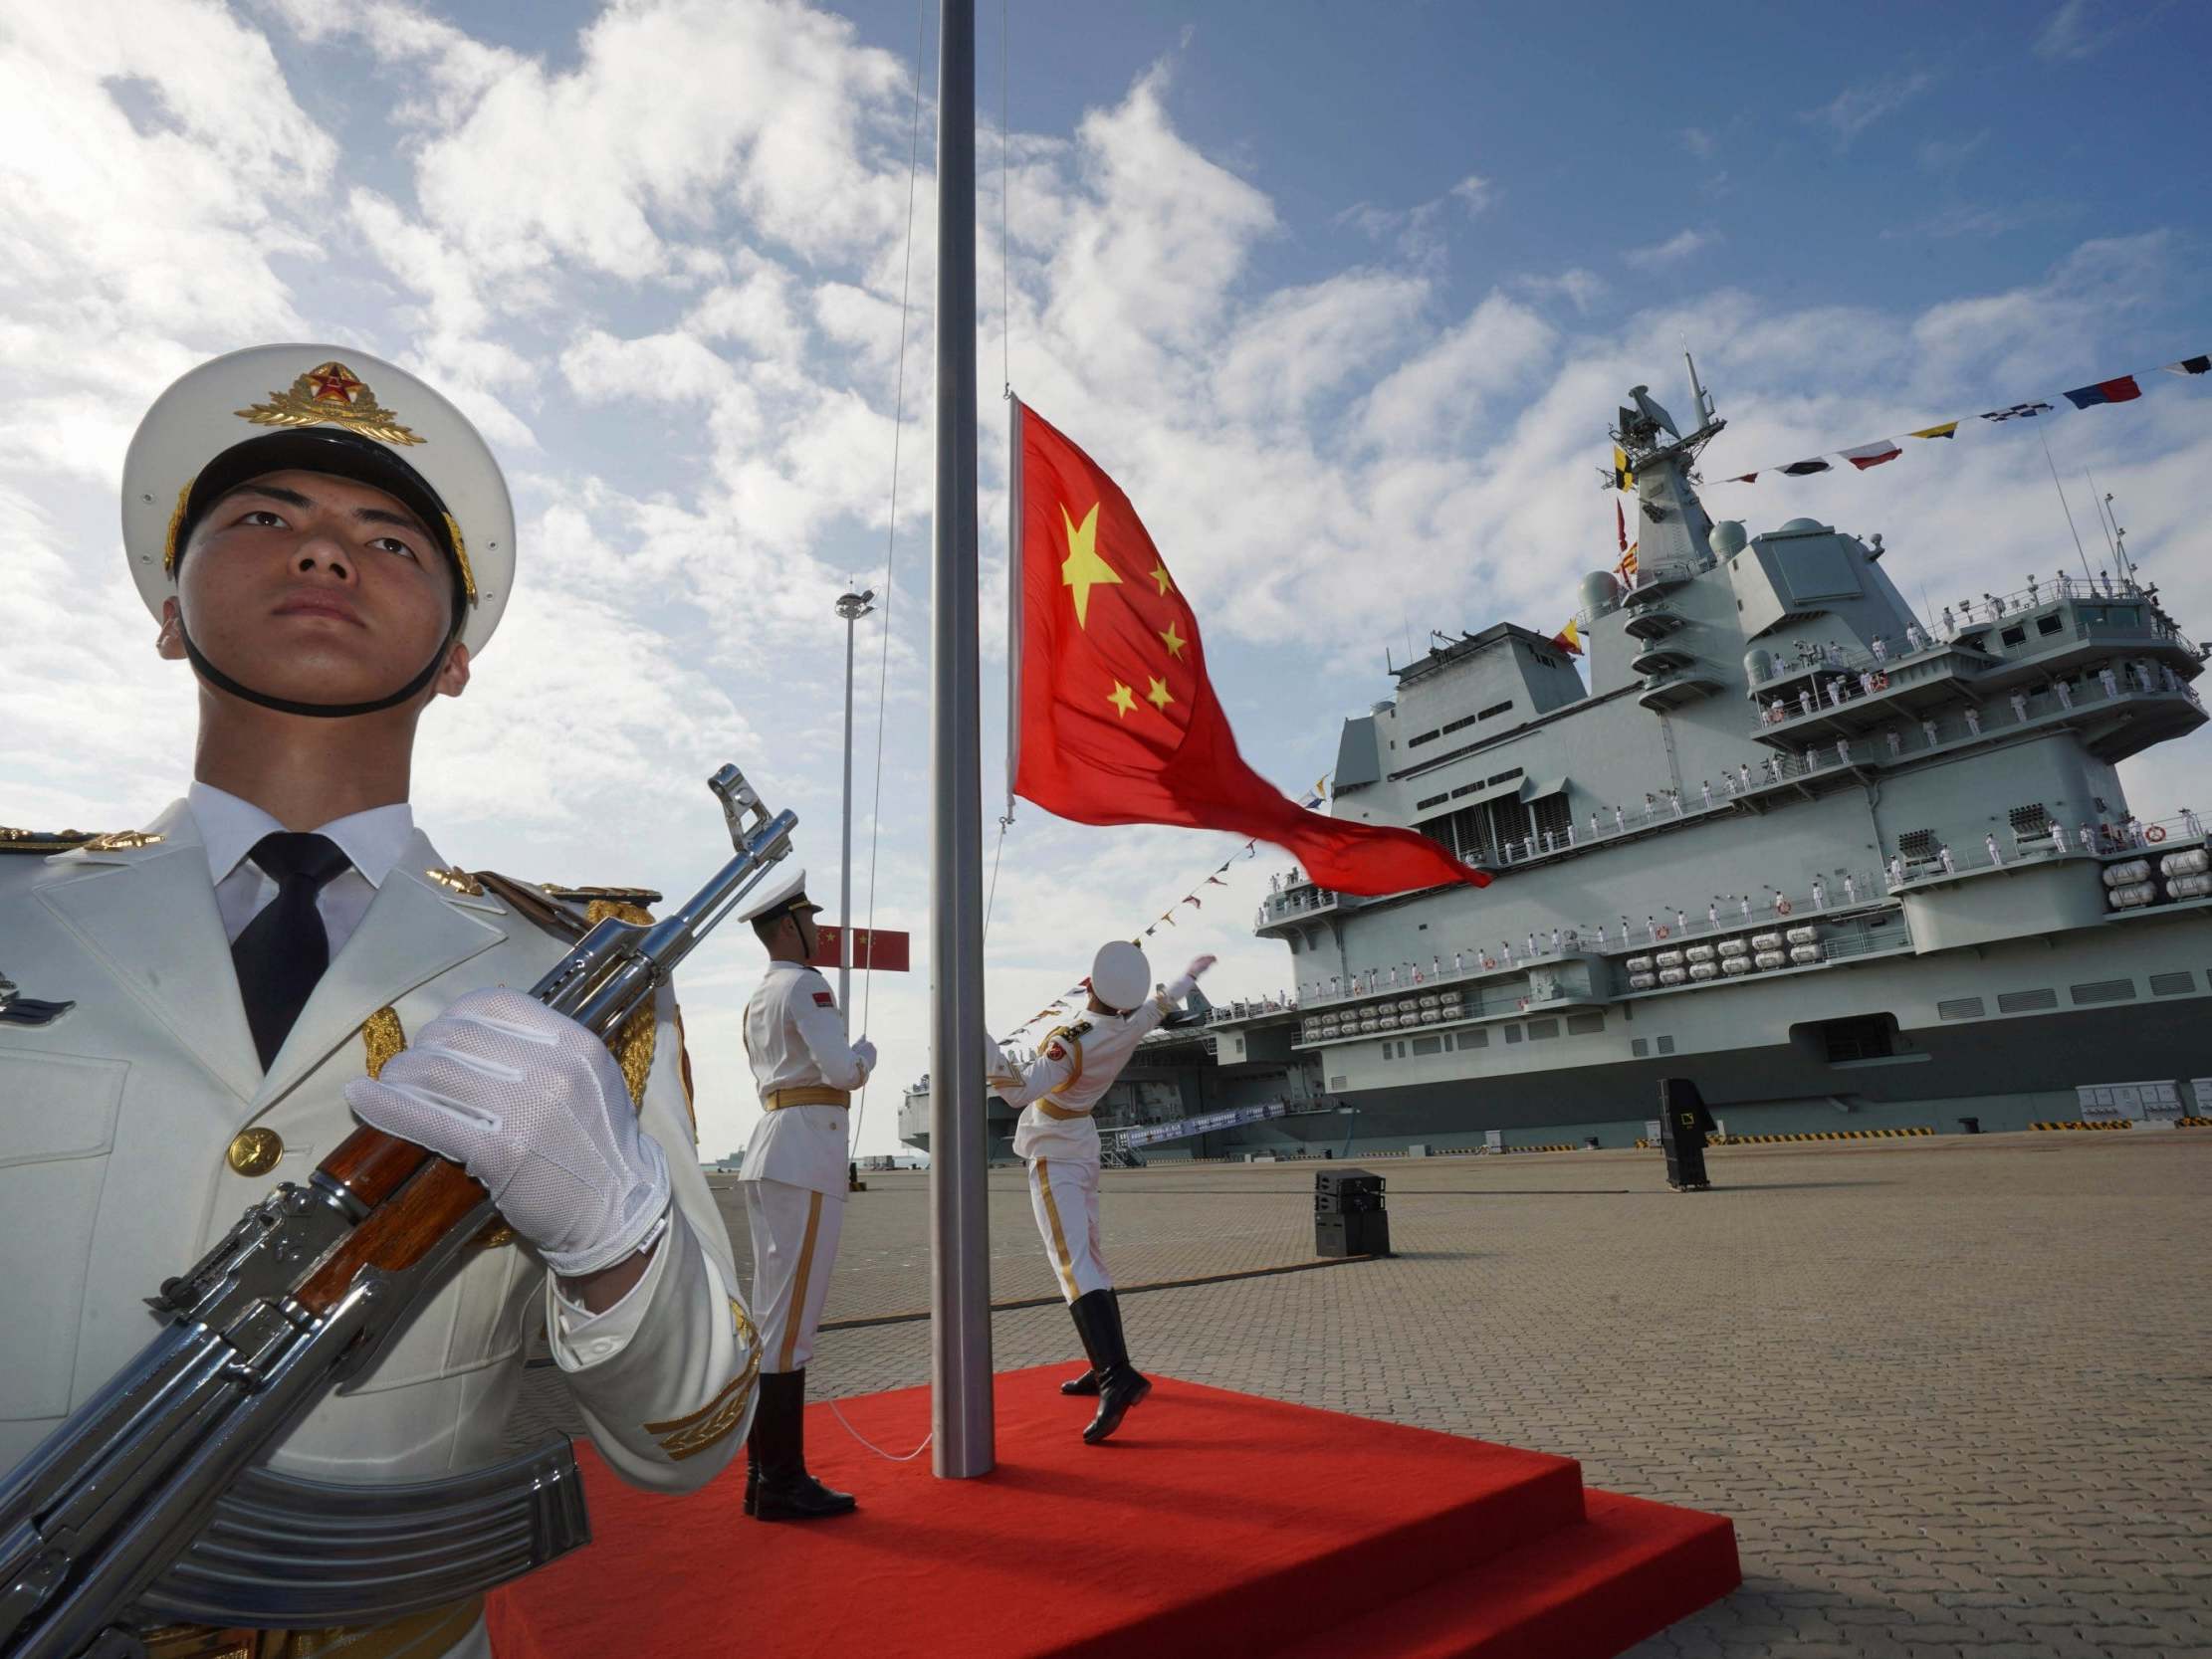 China plans to build 'advanced amphibious assault ship' amid tensions, claims report